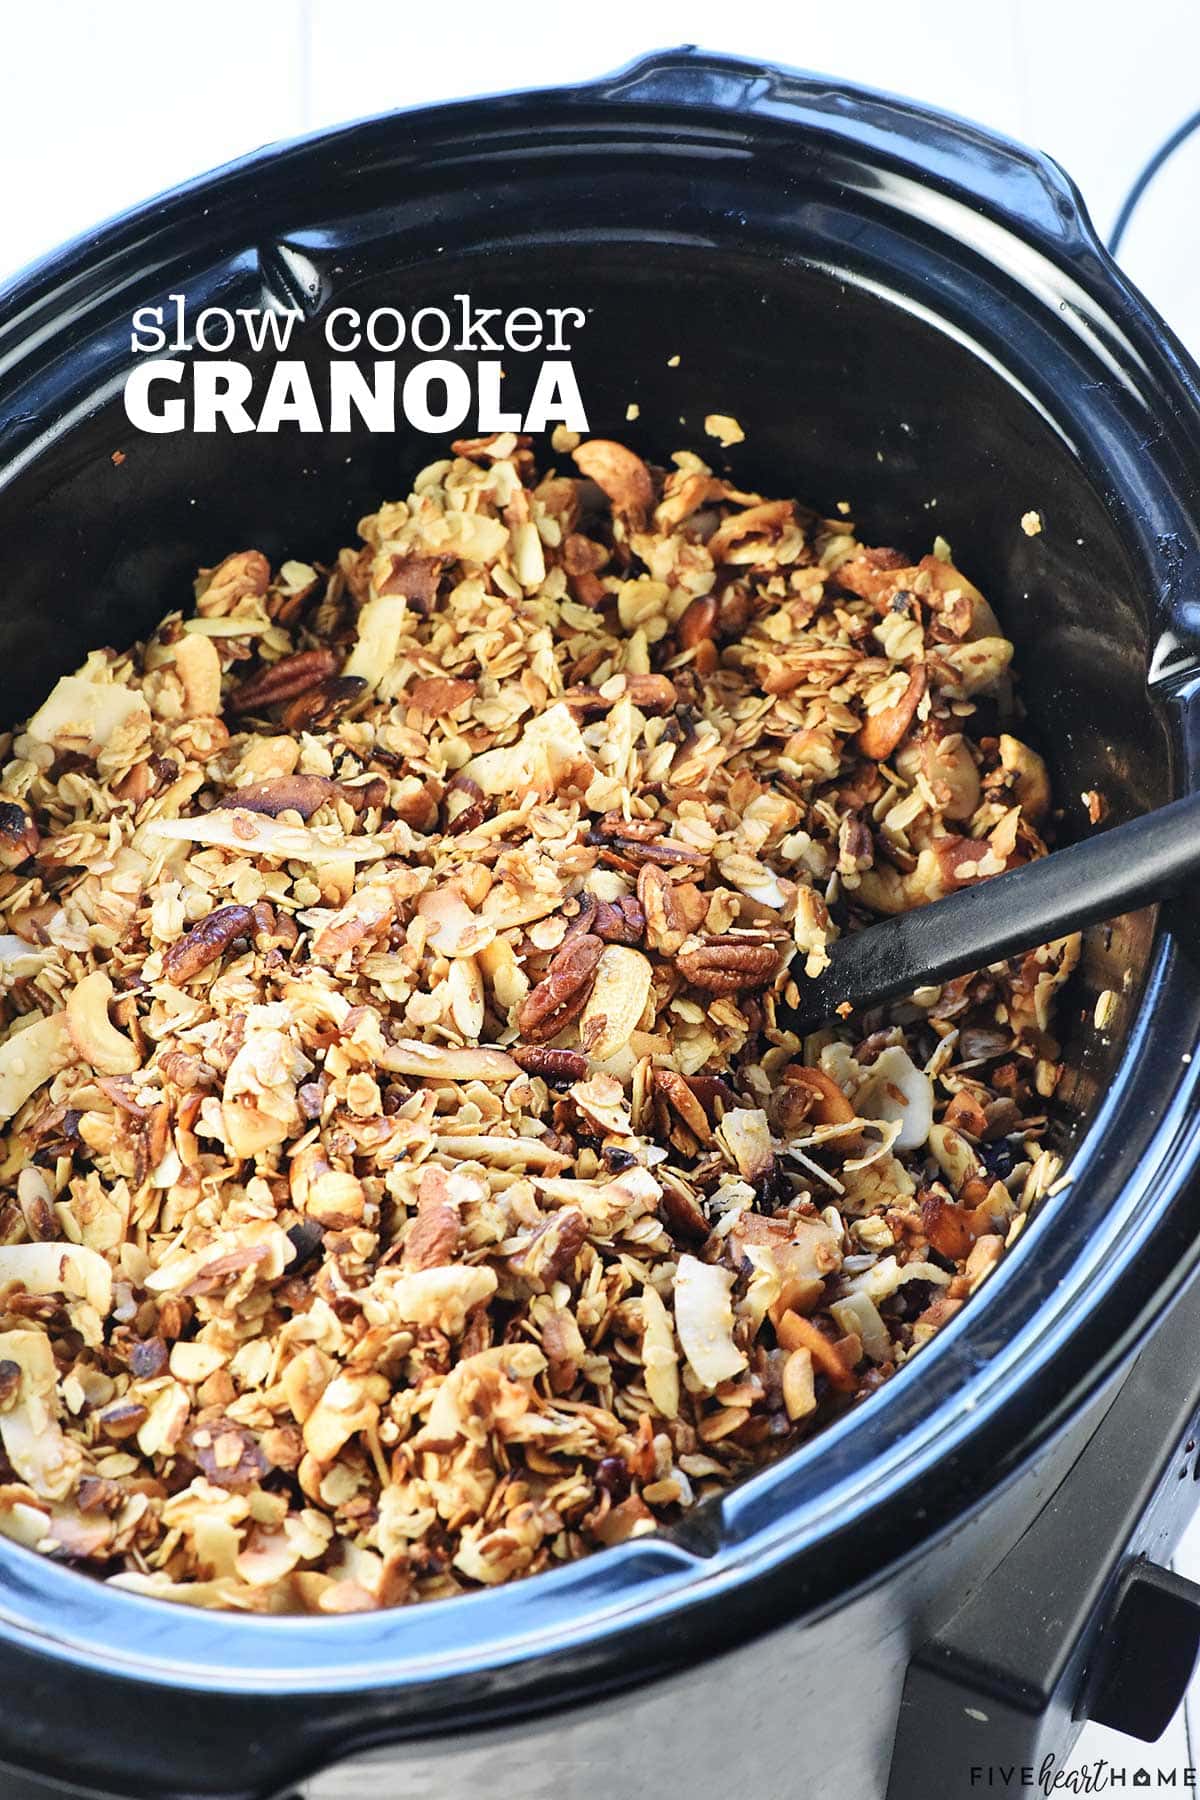 Slow Cooker Granola with text overlay.